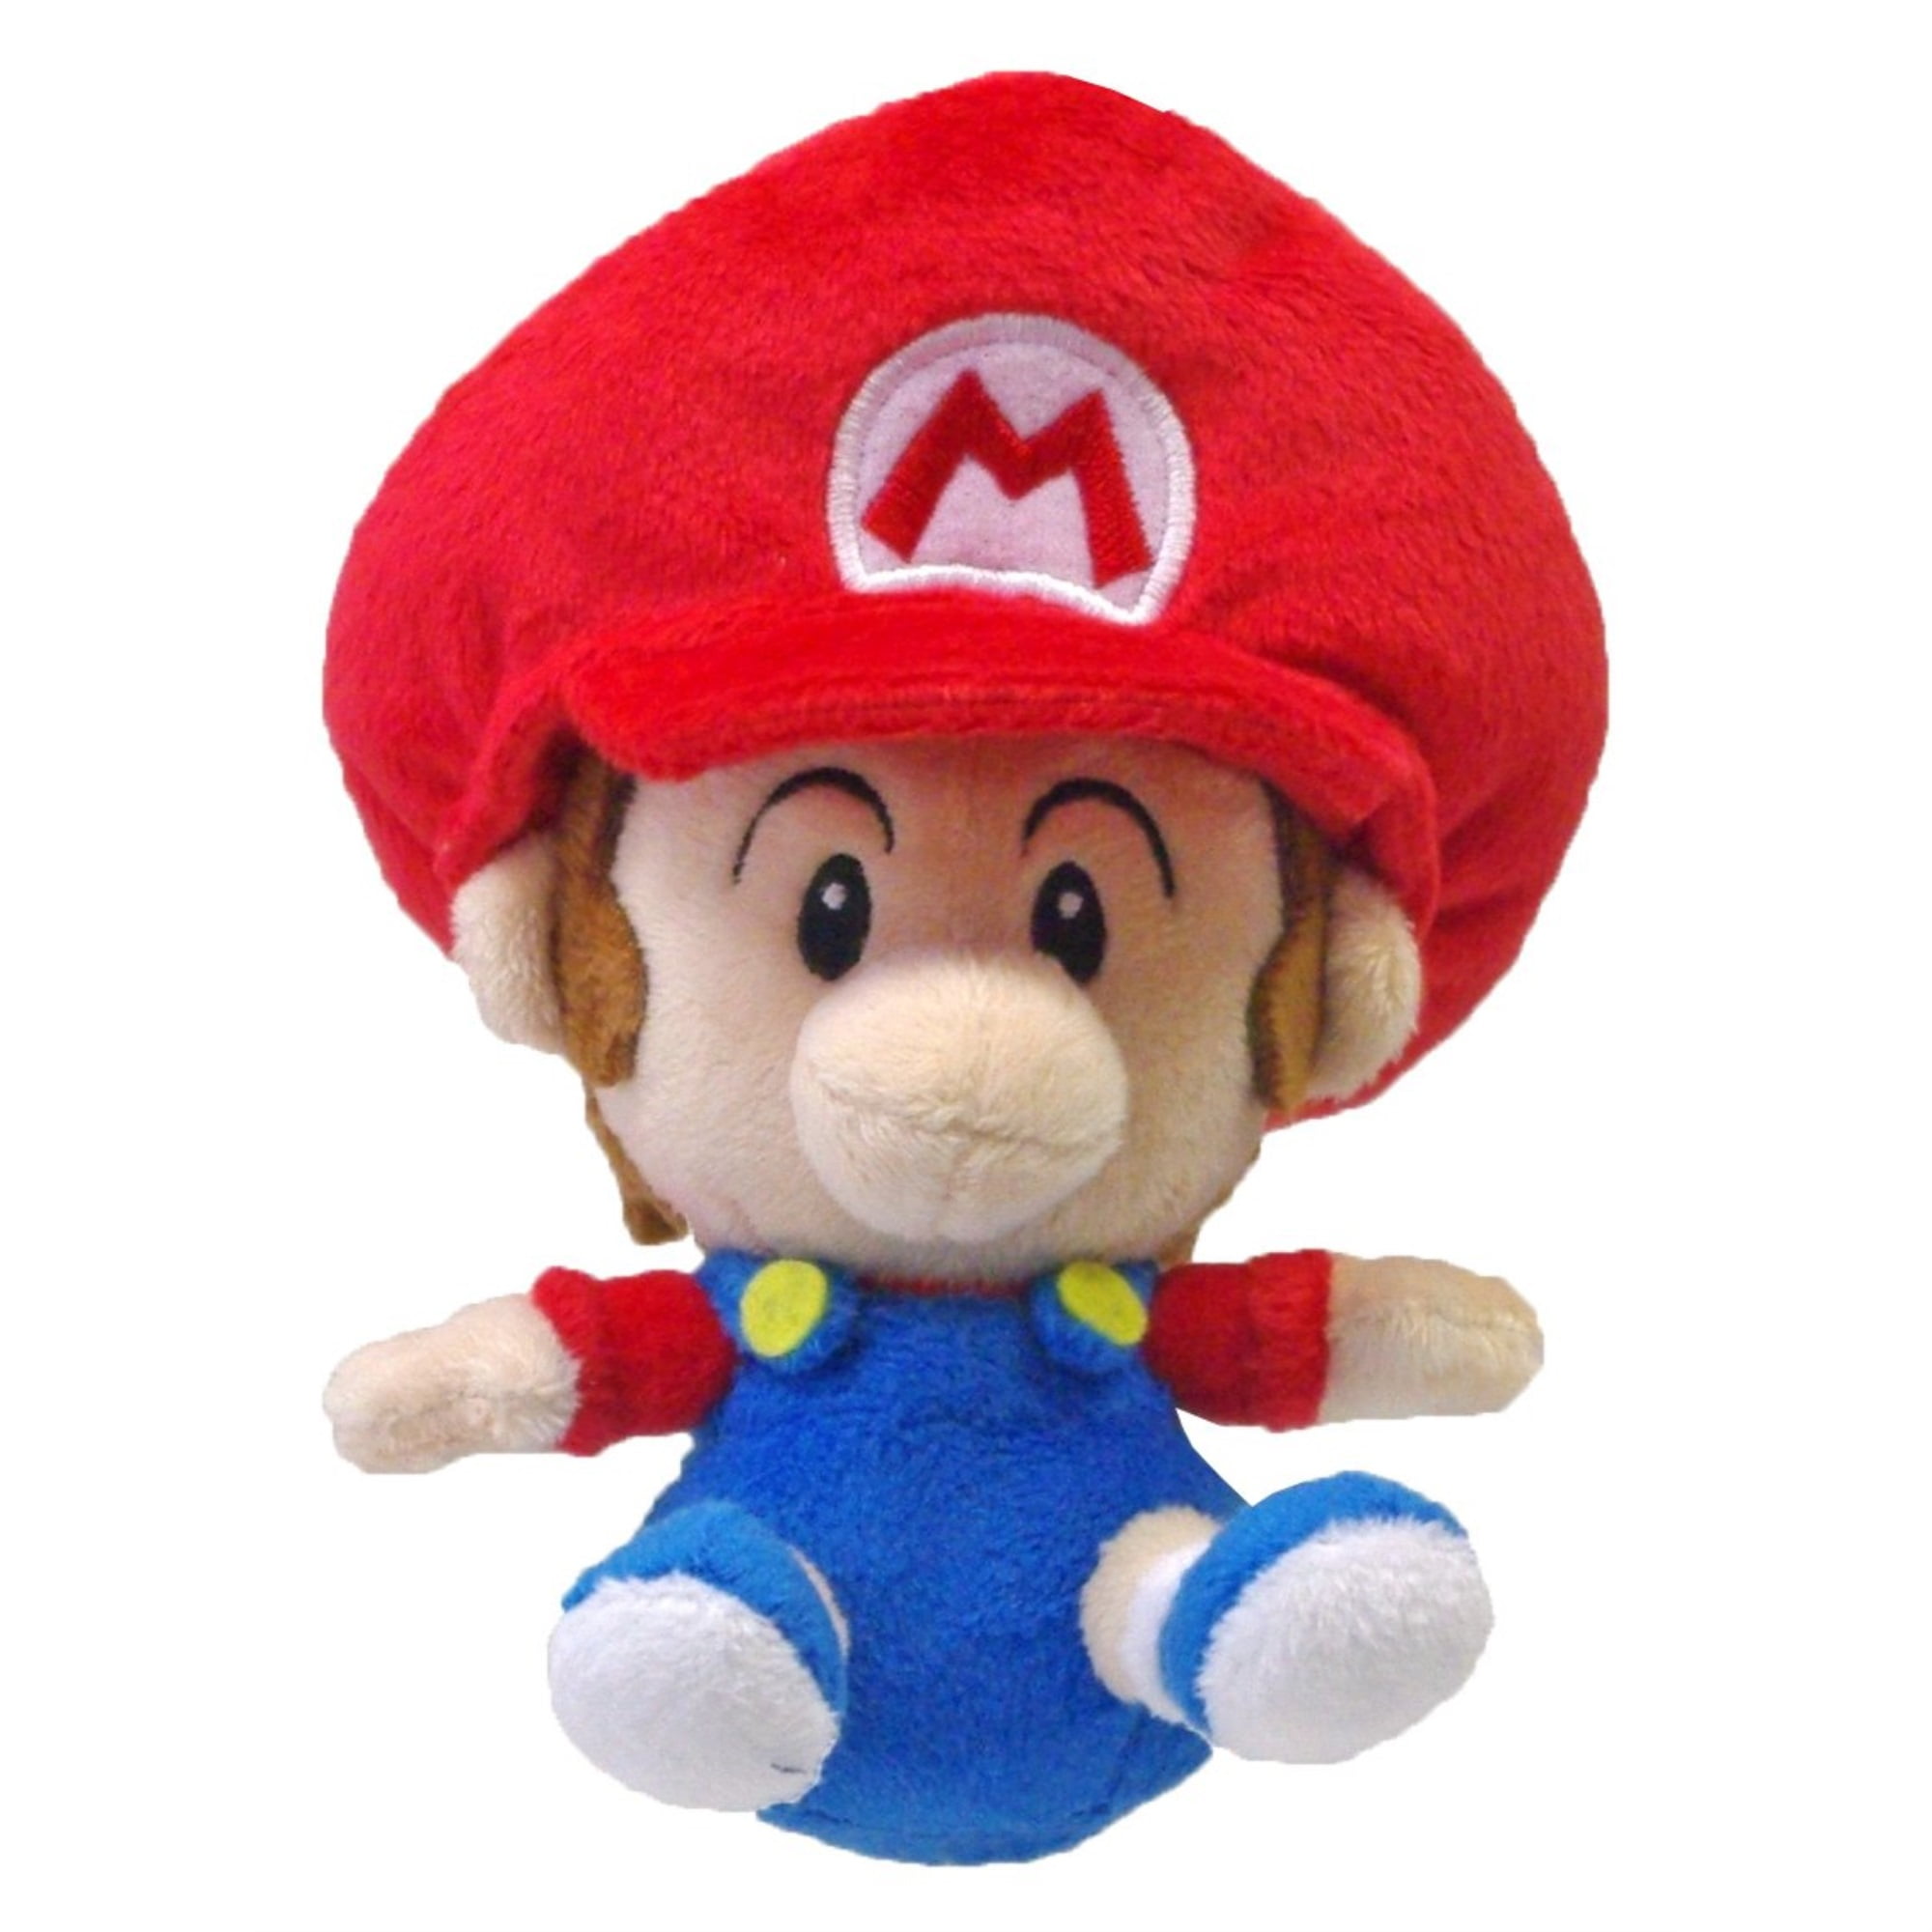 Little Buddy Plushie Super Mario Bros 5" Official Plush NEW Baby Rosalina 